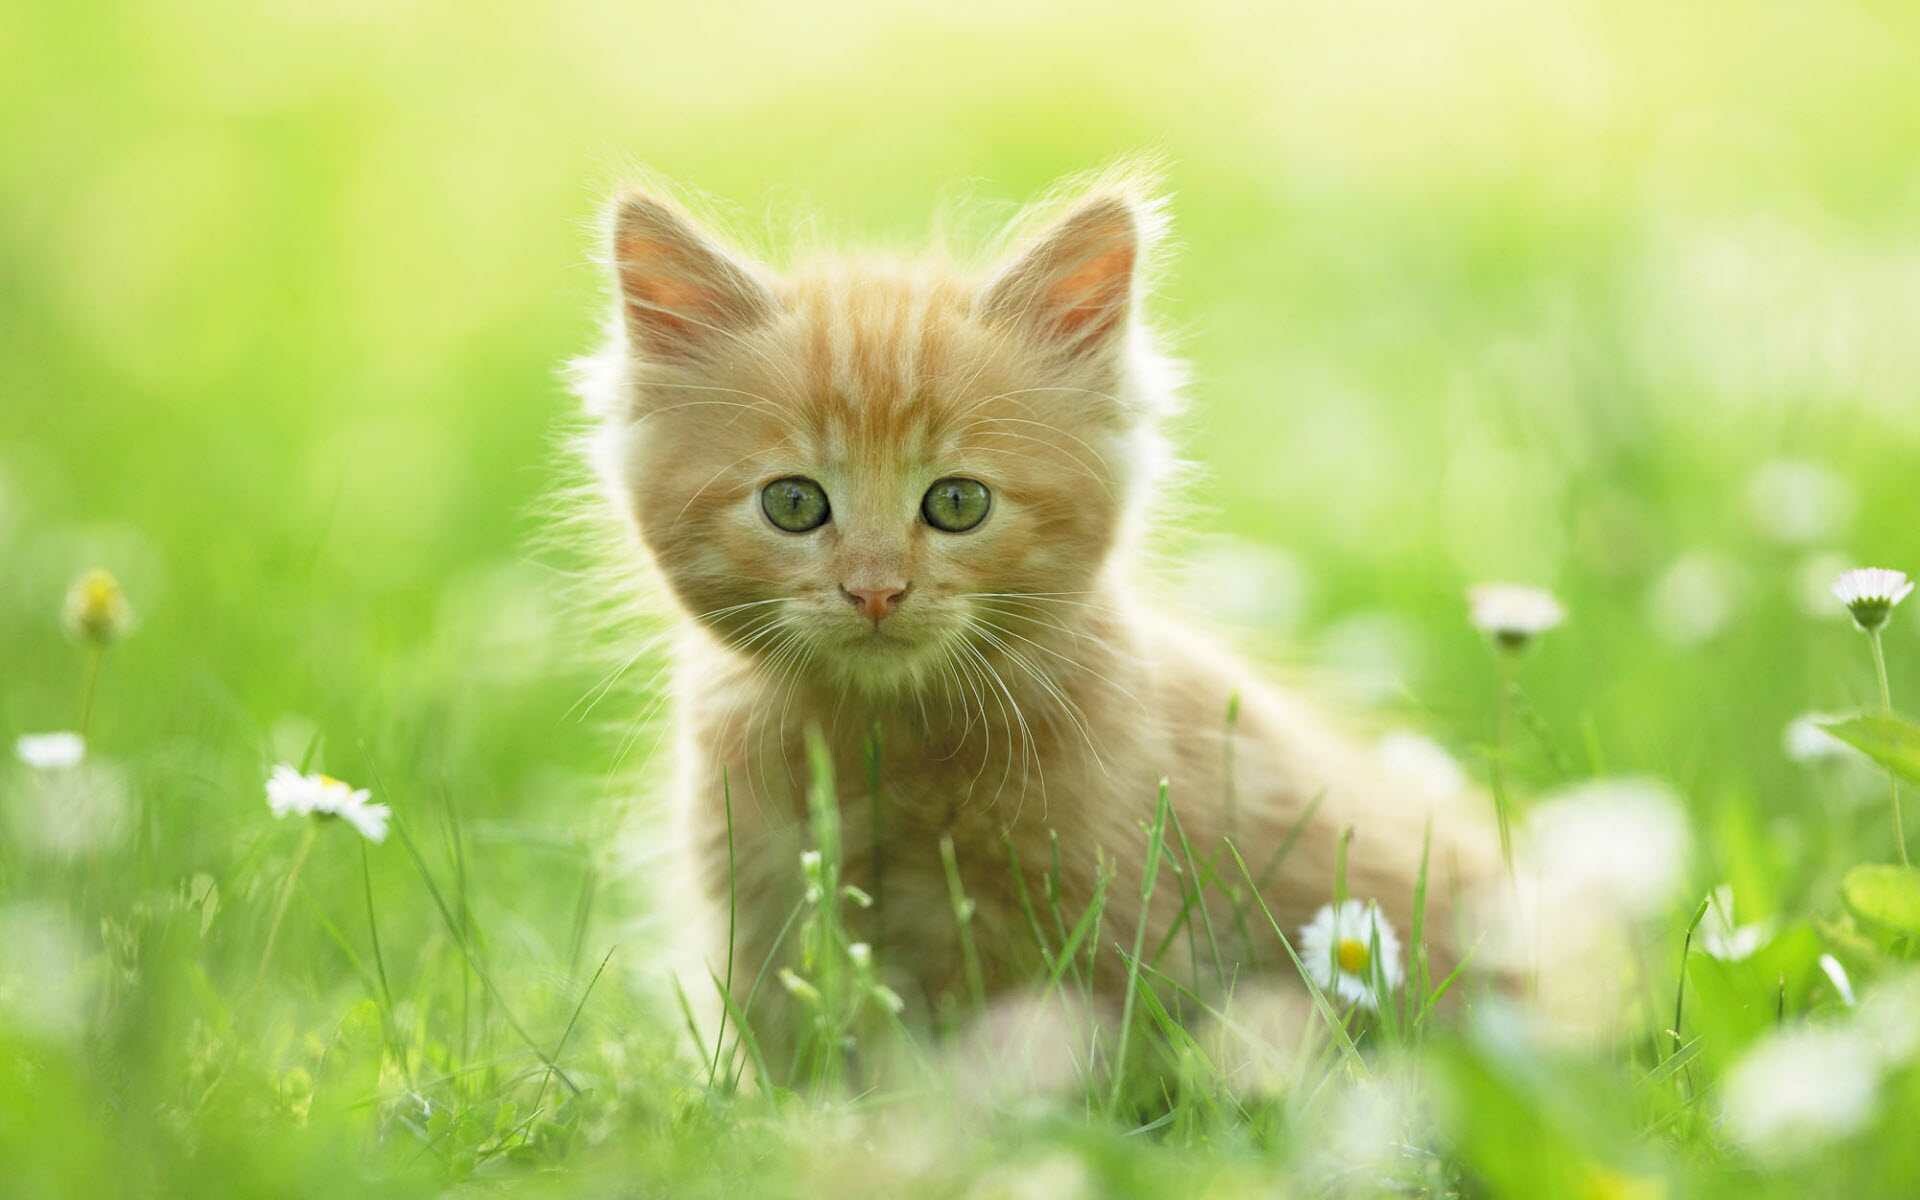 Kitten: A juvenile cat, A furry animal that has a long tail and sharp claws. 1920x1200 HD Wallpaper.